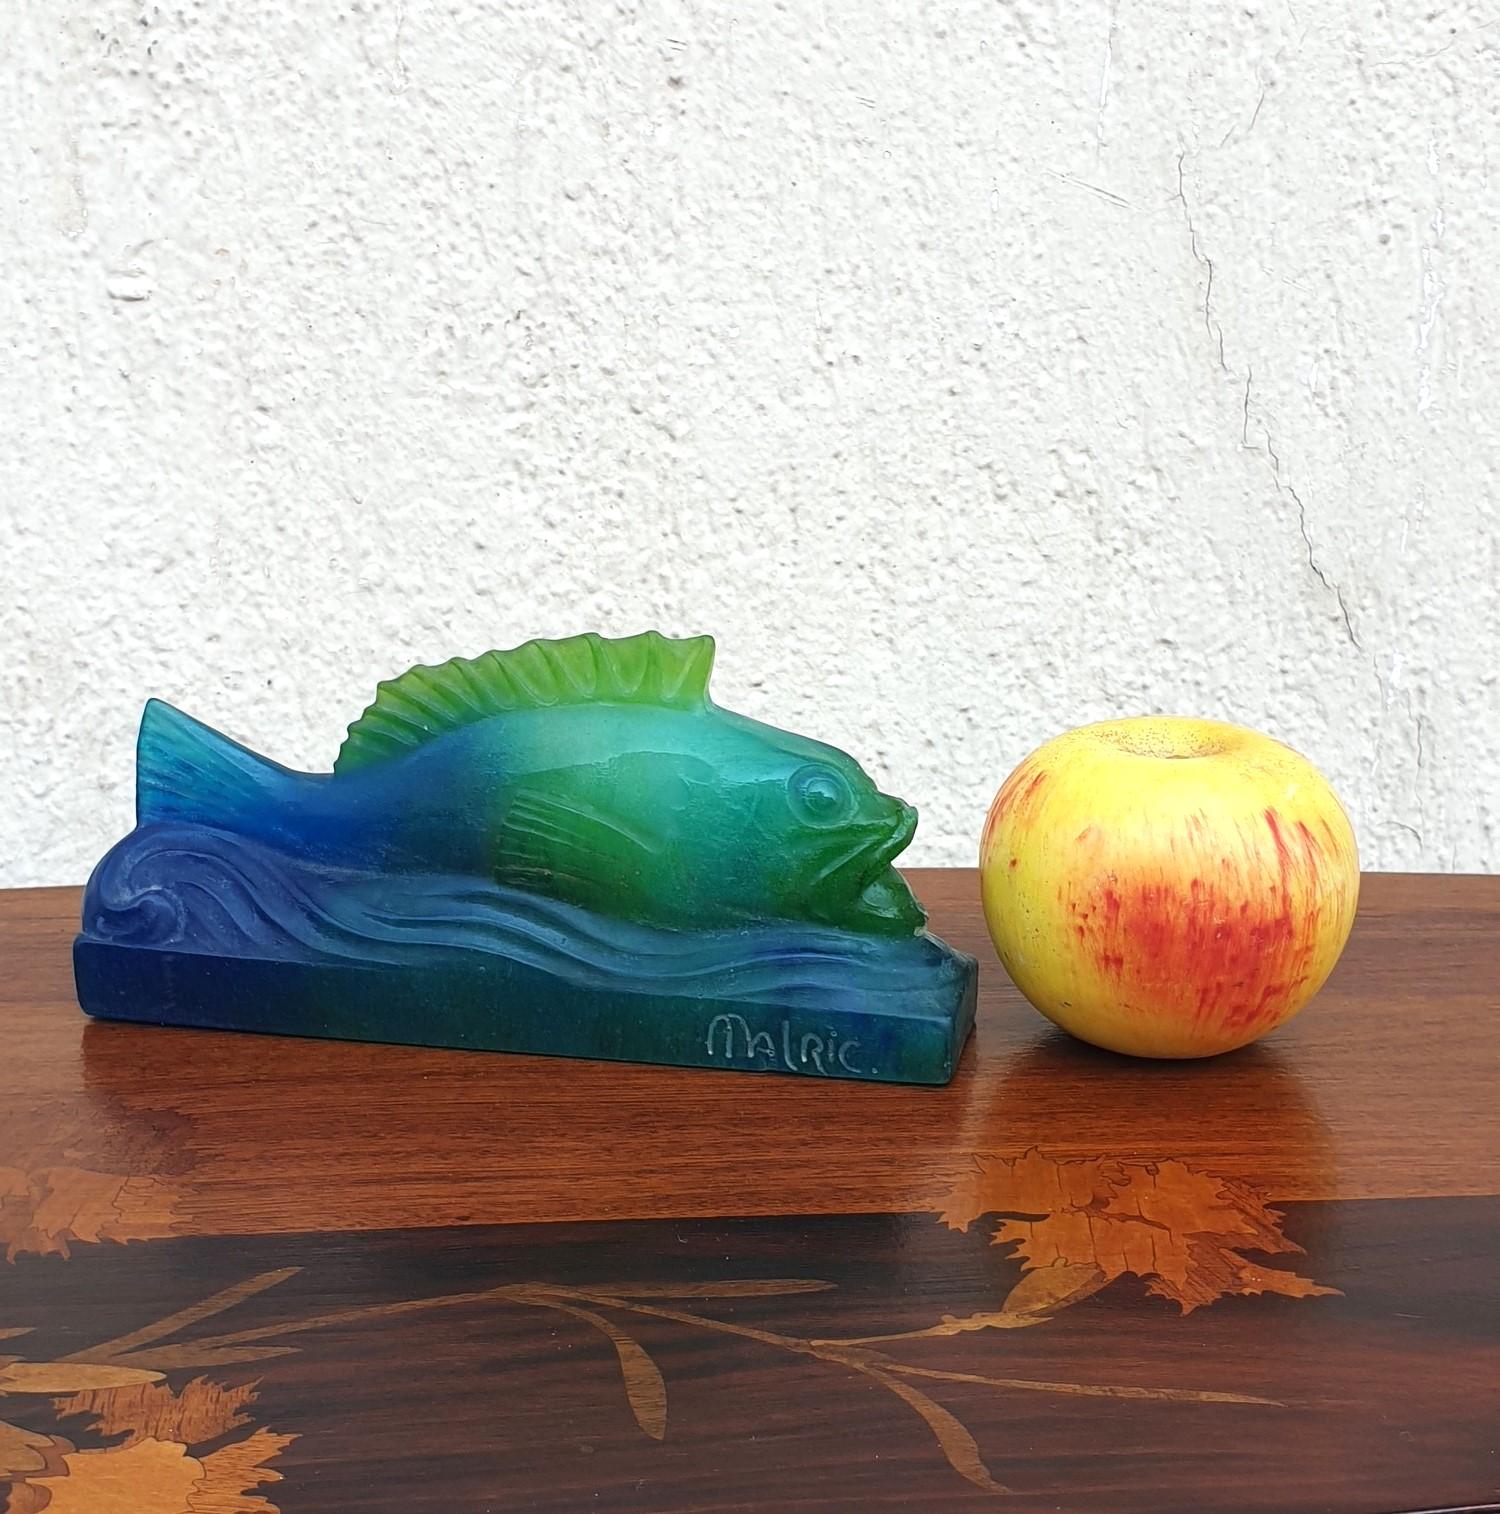 Fish in glass paste in a gradient of green and blue, signed A Walter Nancy

Good general condition, small chip at the mouth of the fish and below the tail

Art Nouveau

Amalric Walter, born in 1870, trained at the Manufacture of Sèvres, then set up